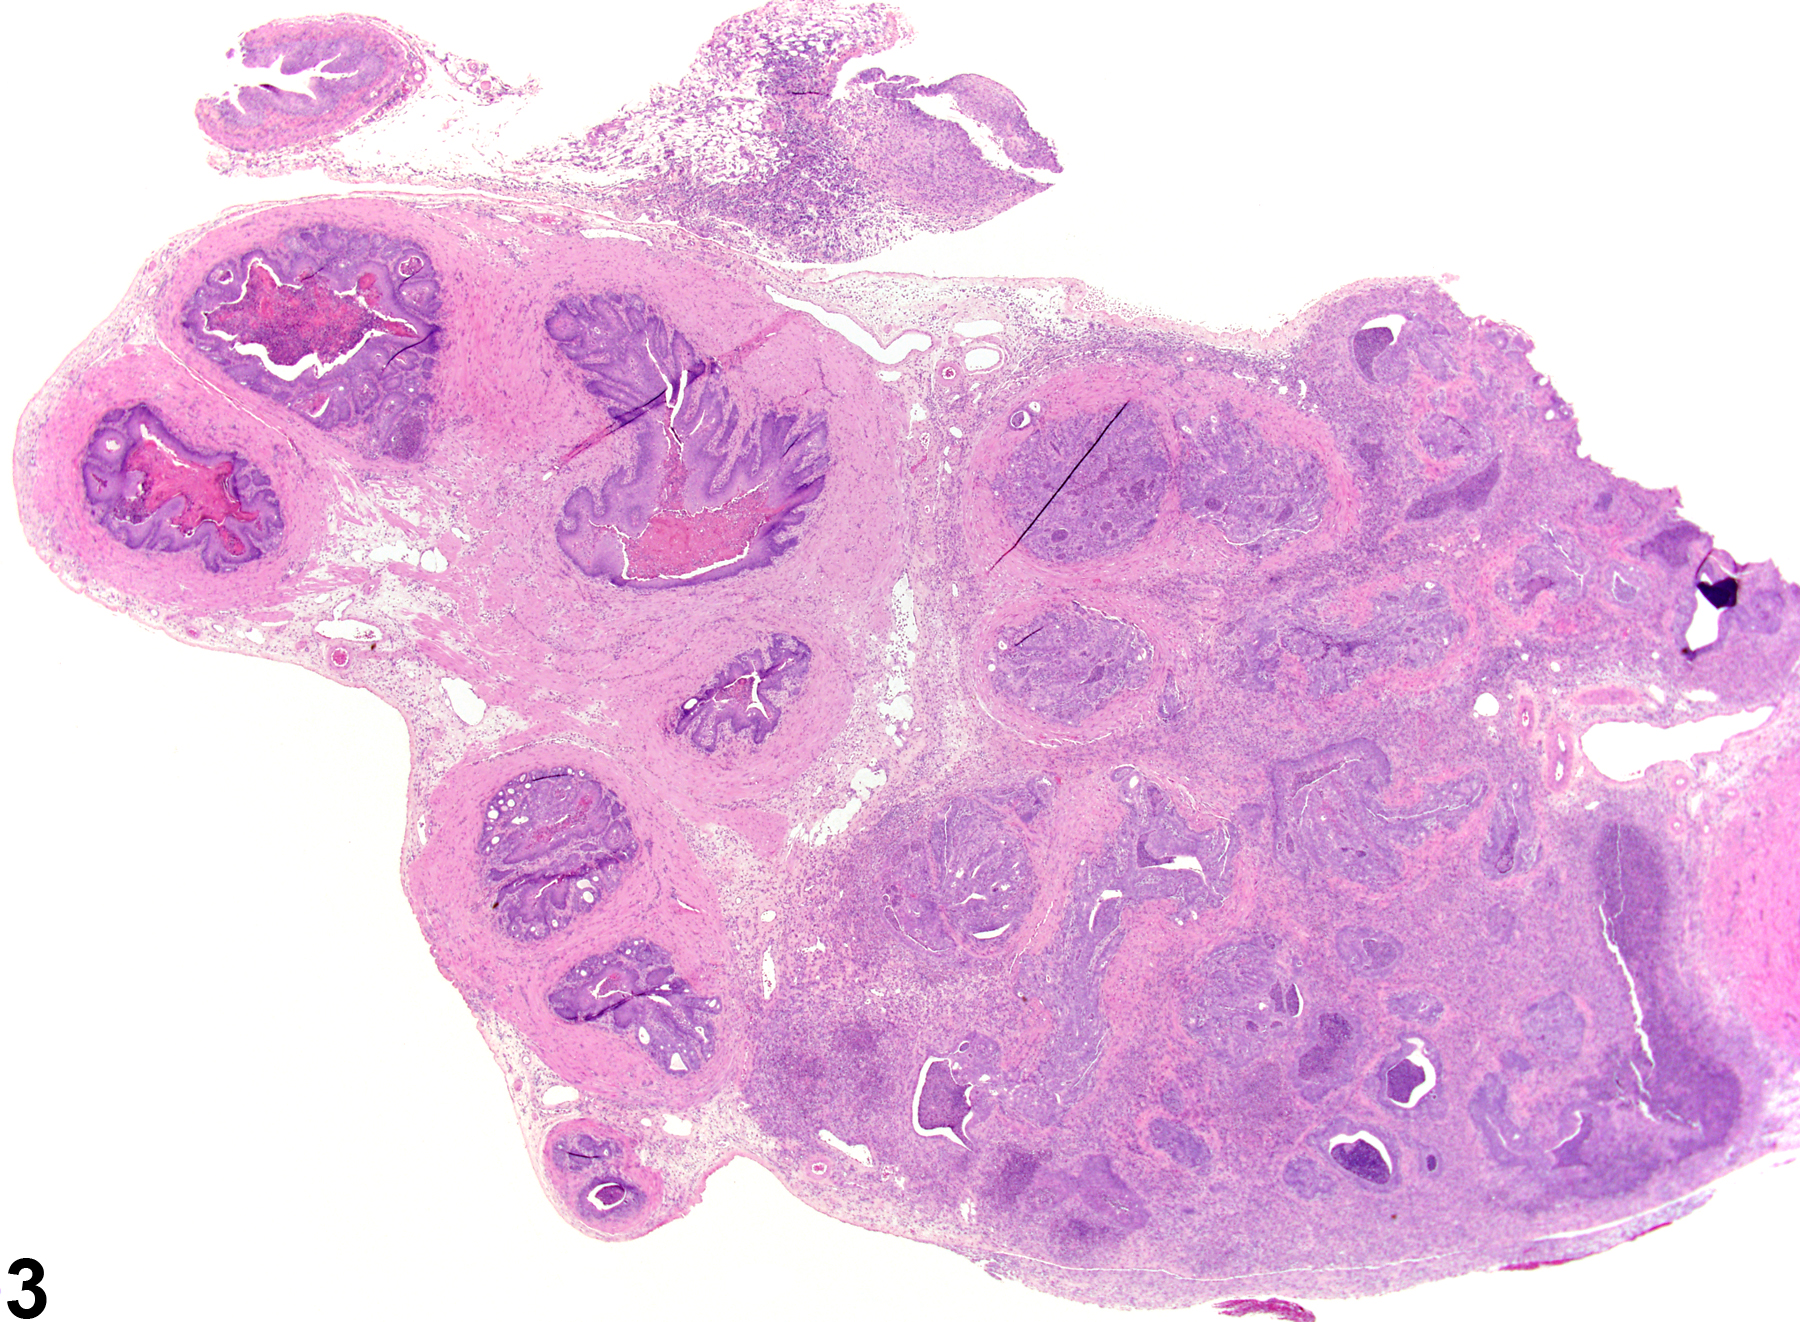 Image of inflammation in the seminal vesicle from a male Harlan Sprague-Dawley rat in an chronic study